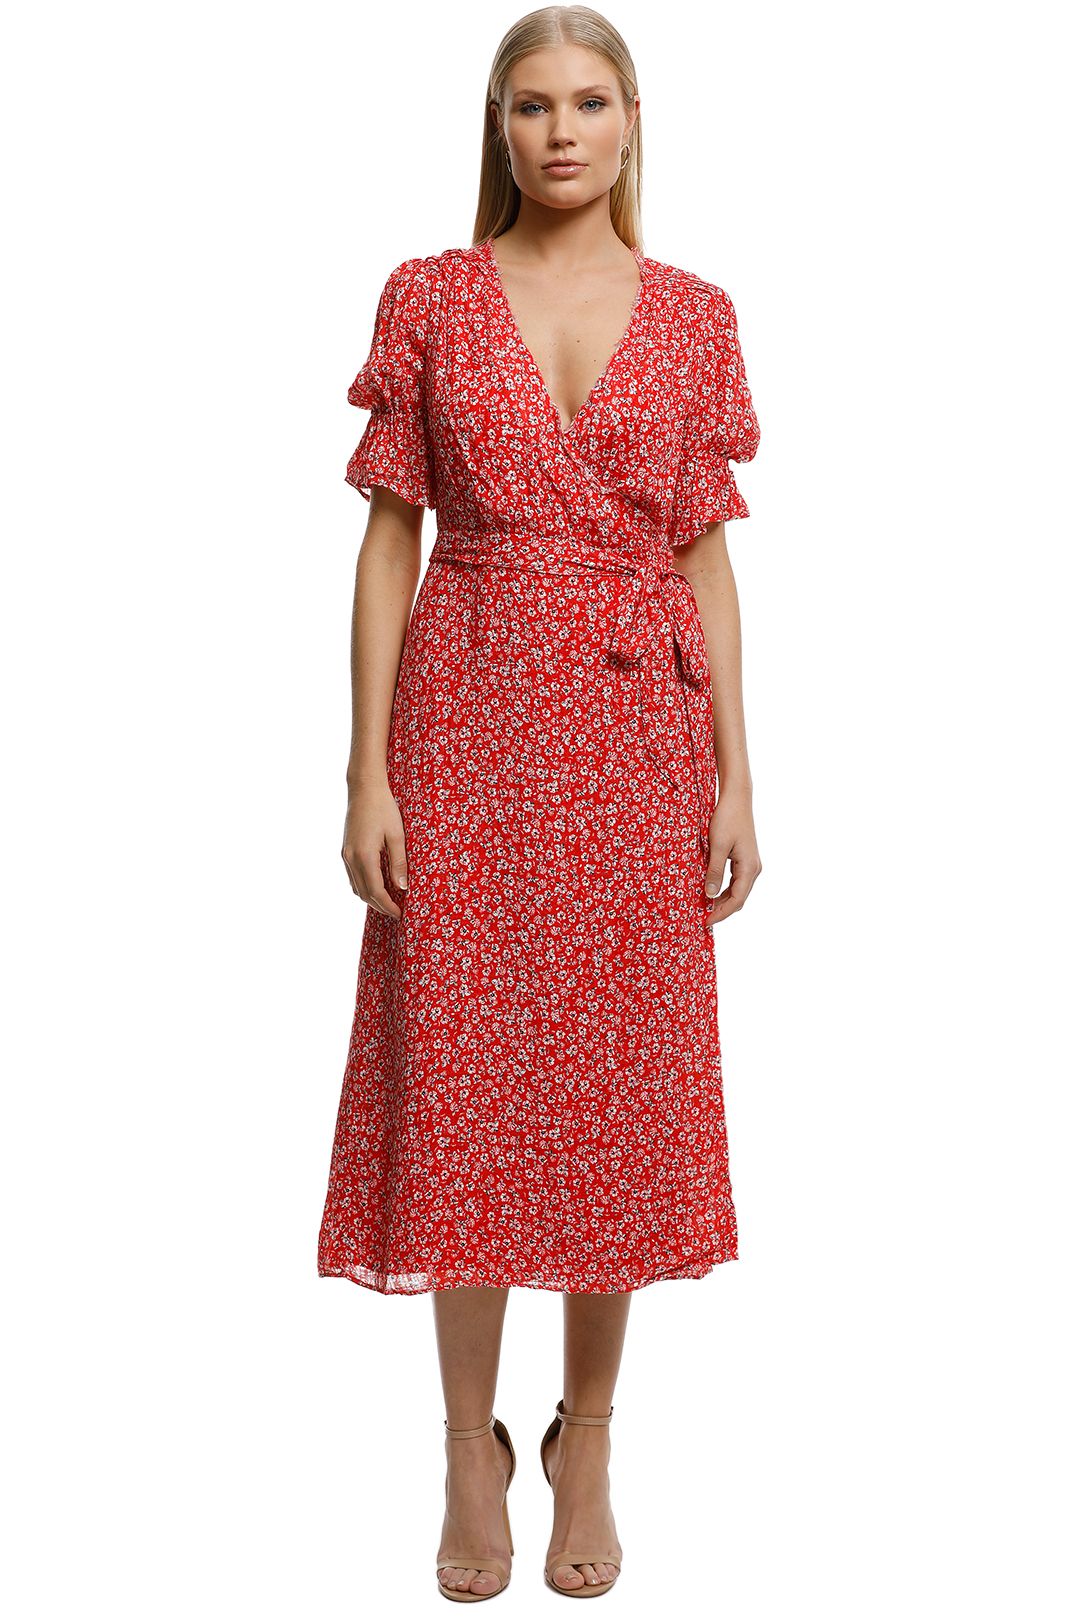 Stevie-May-Claret-Midi-Dress-Red-Micro-Floral-FrontA